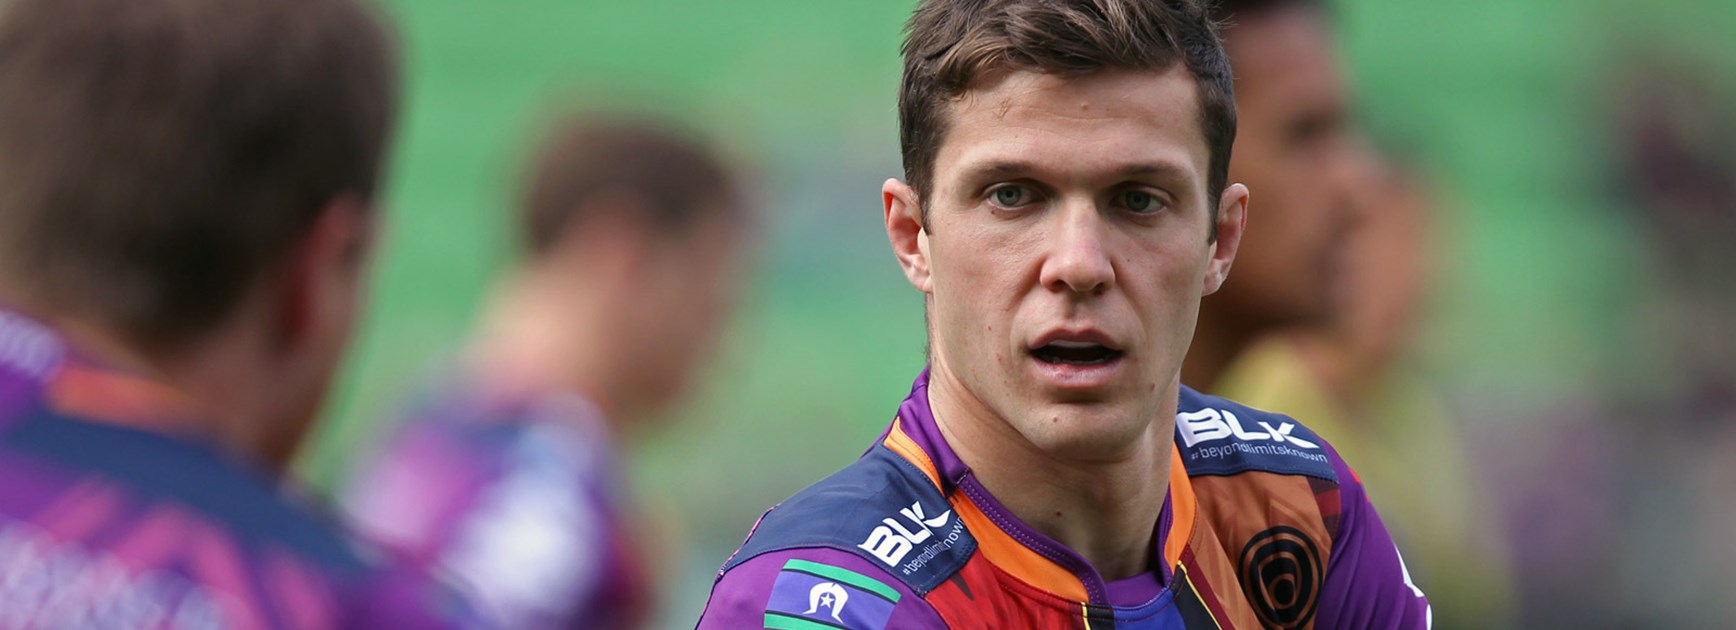 Storm winger Matt Duffie spent two and a half years battling injuries.